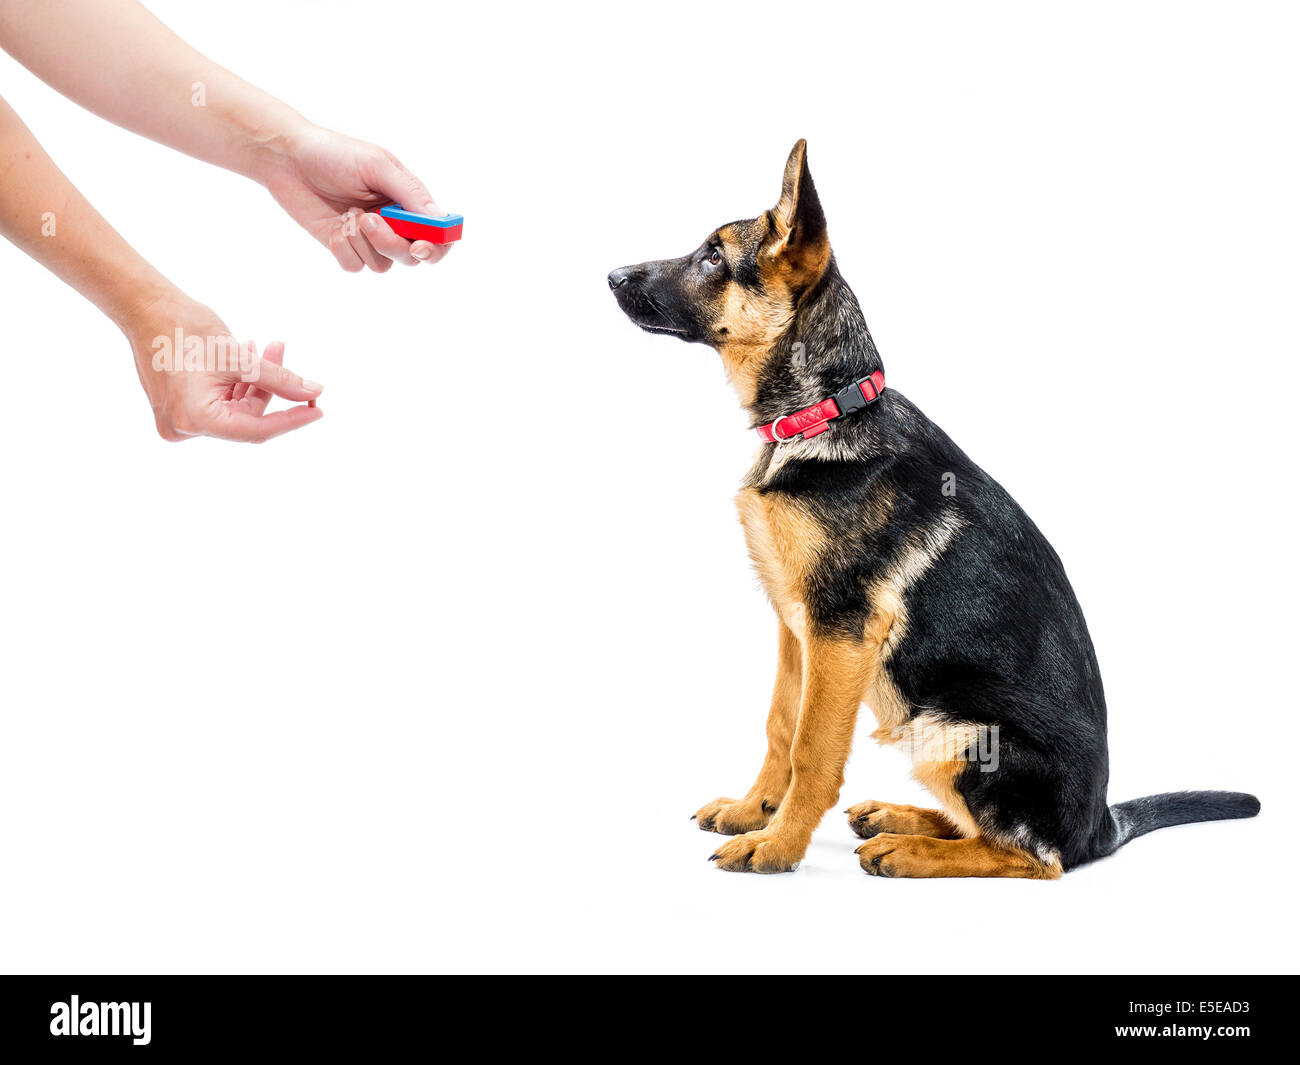 German shepherd puppy being trained how to sit using clicker and treat method Stock Photo